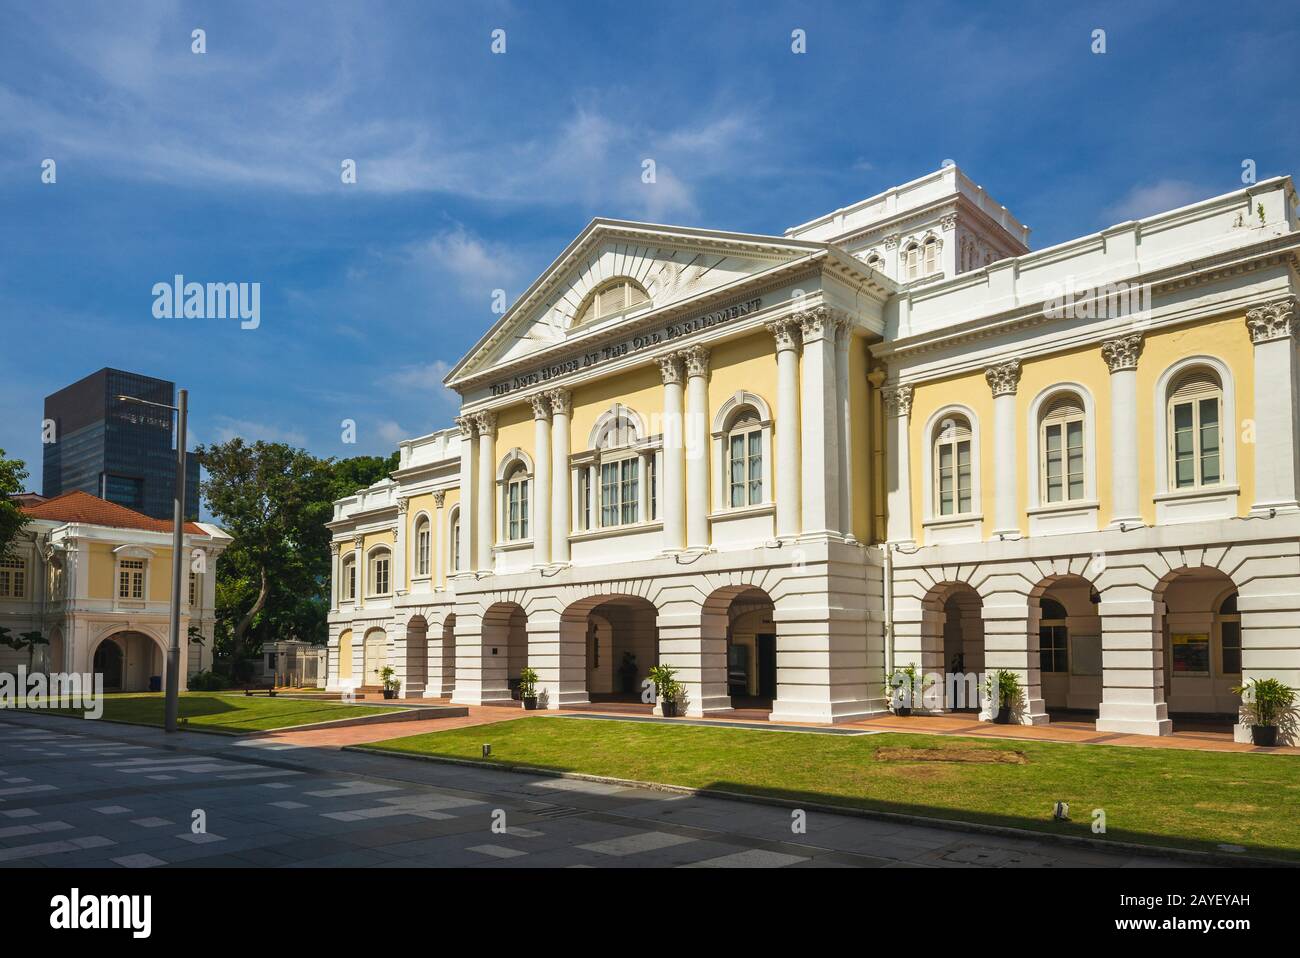 Arts House (Old Parliament House) in singapur Stockfoto